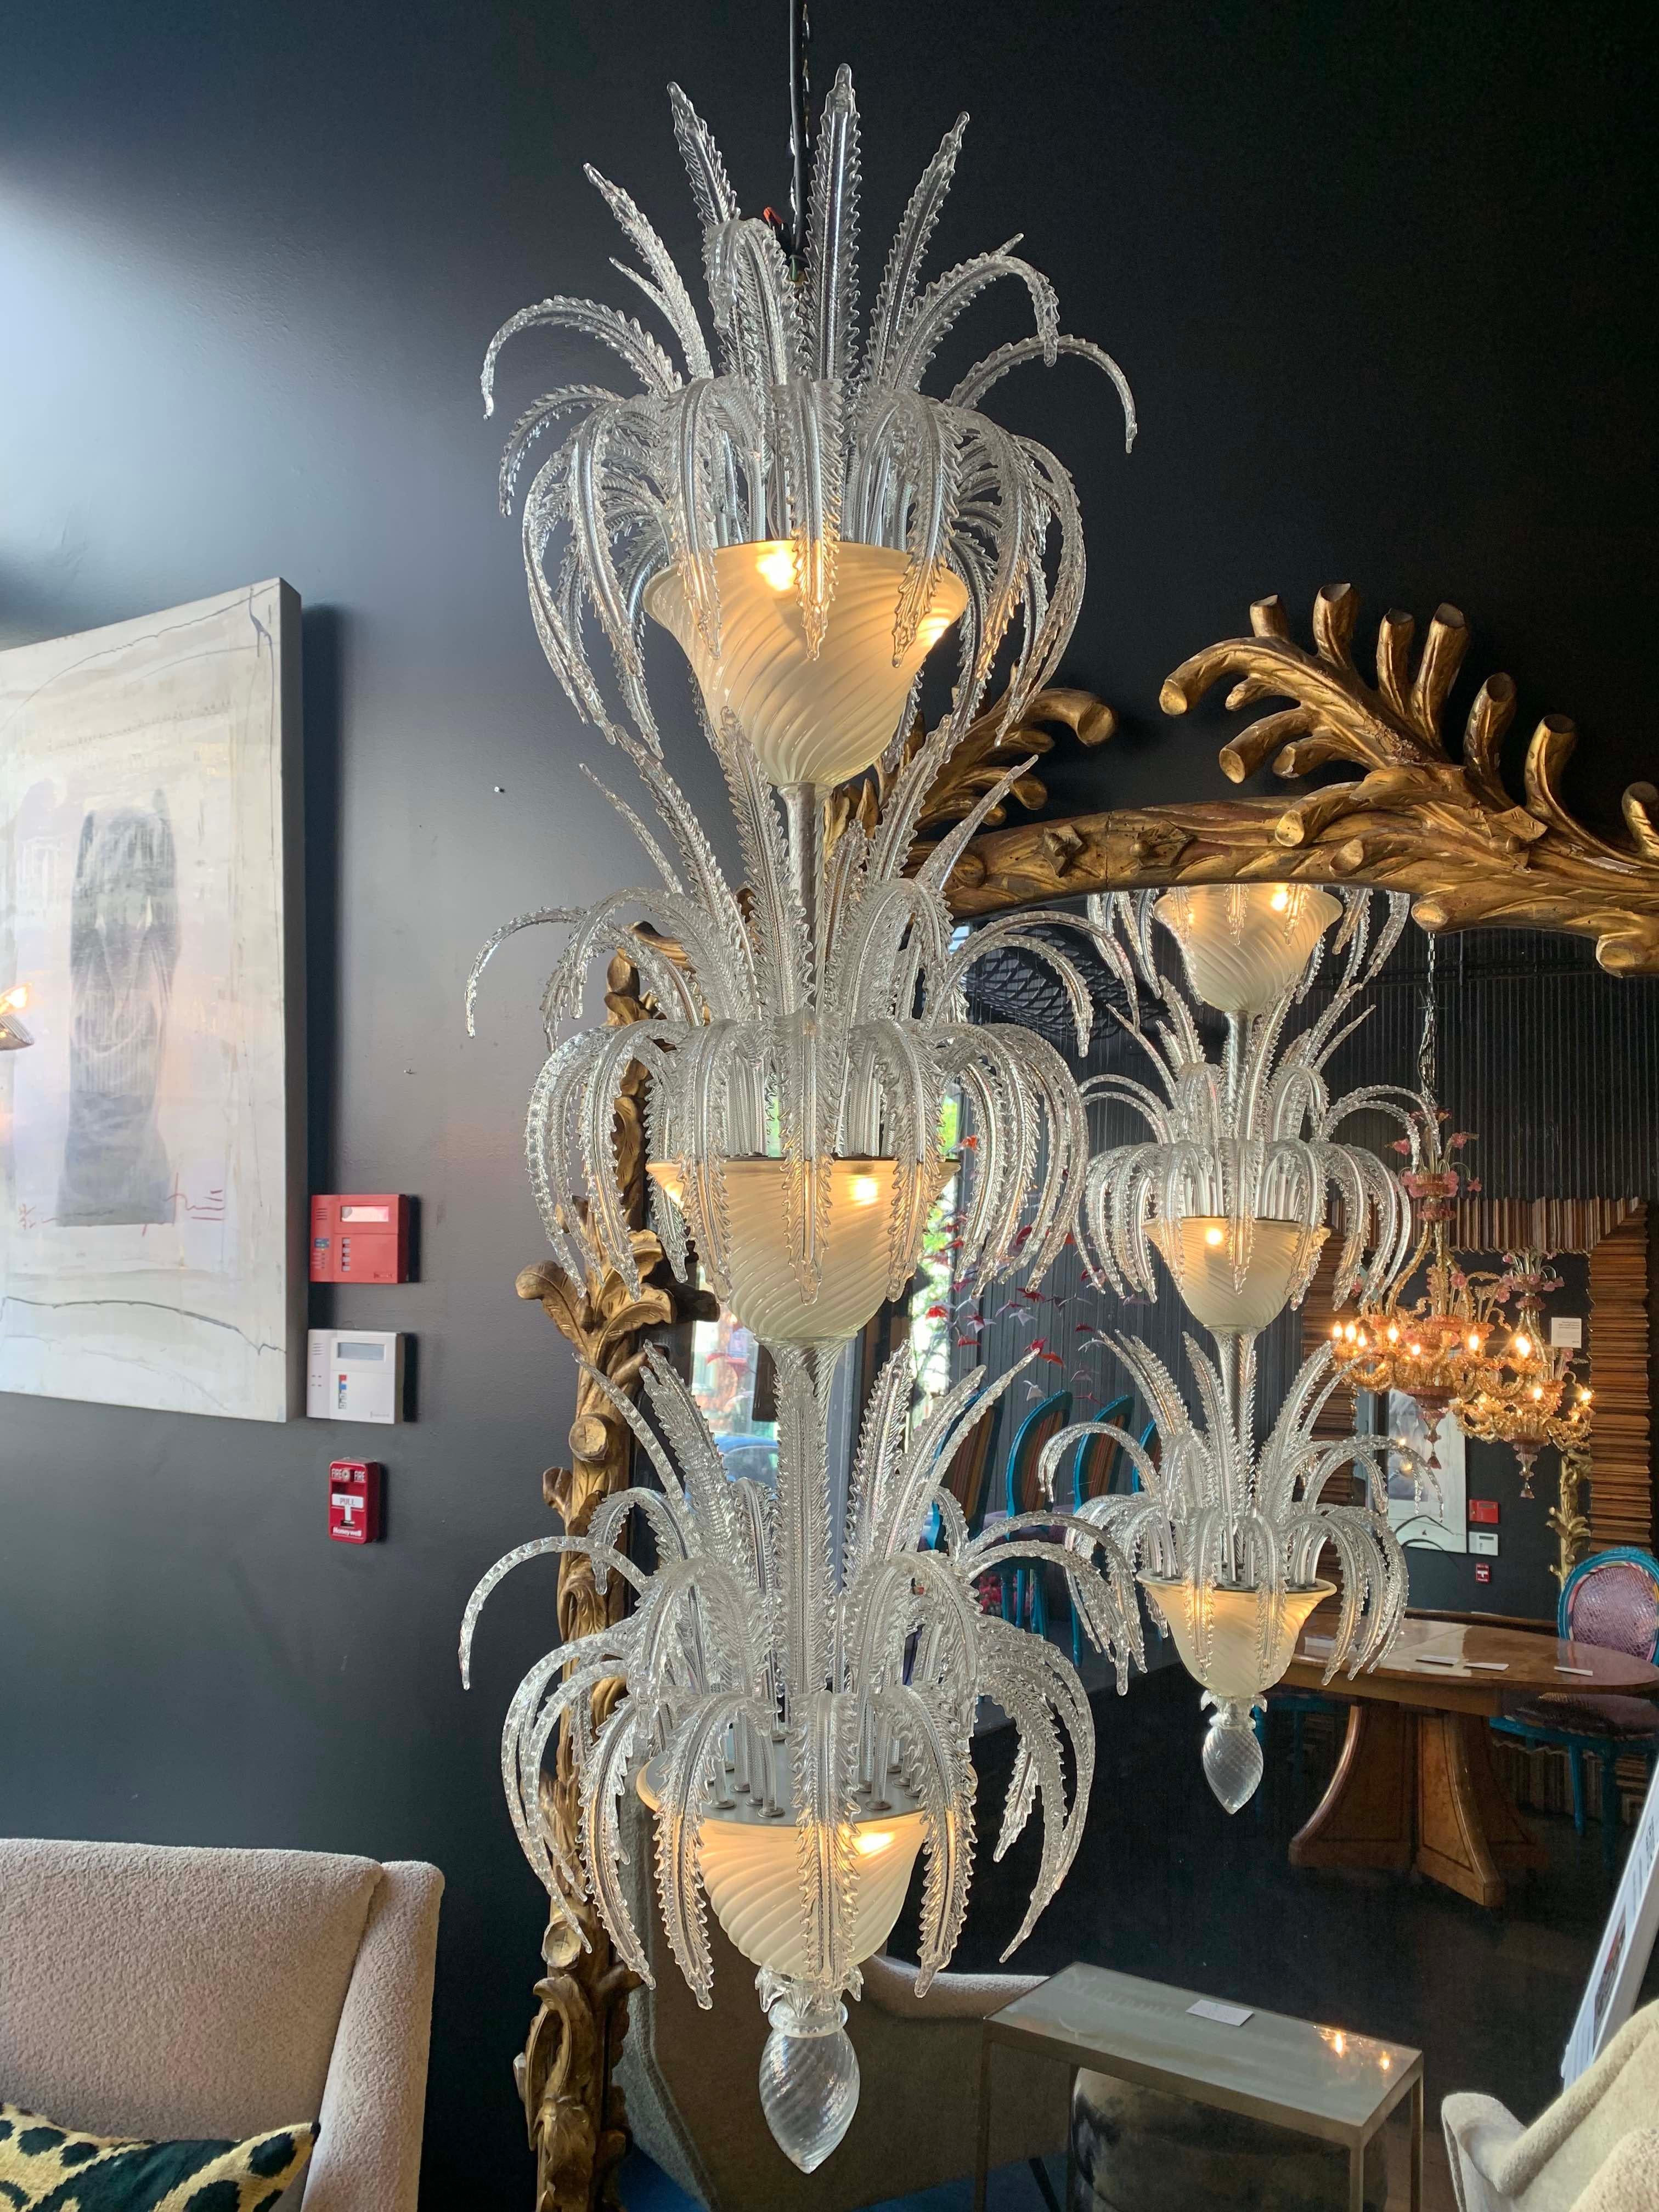 This exceptional Salviati Murano chandelier is a stunning example of lighting as art. The thistle-like leaves seem as though covered in ice. This fixture measures 62’ long and would be incredible over a center foyer table or in a dramatic stairwell